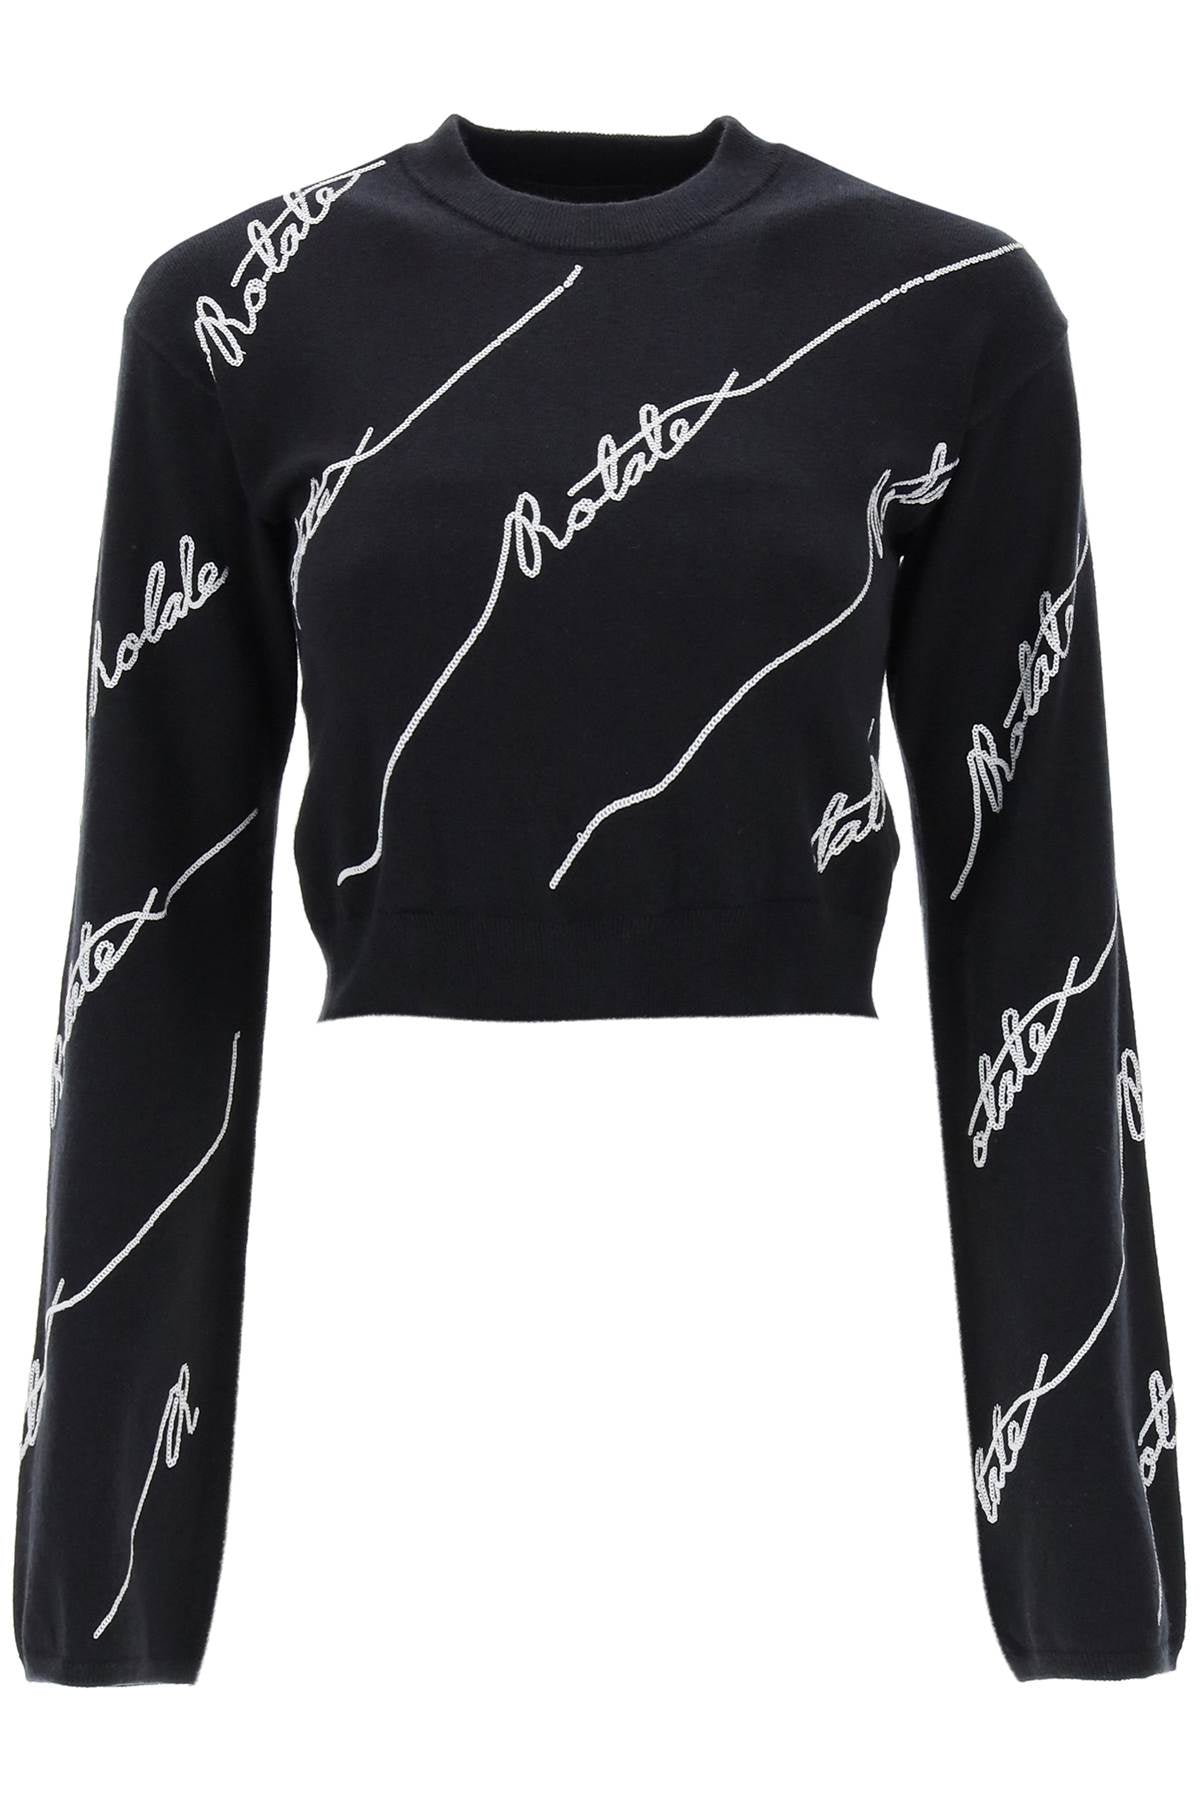 Rotate sequined logo cropped sweater 110113100 BLACK